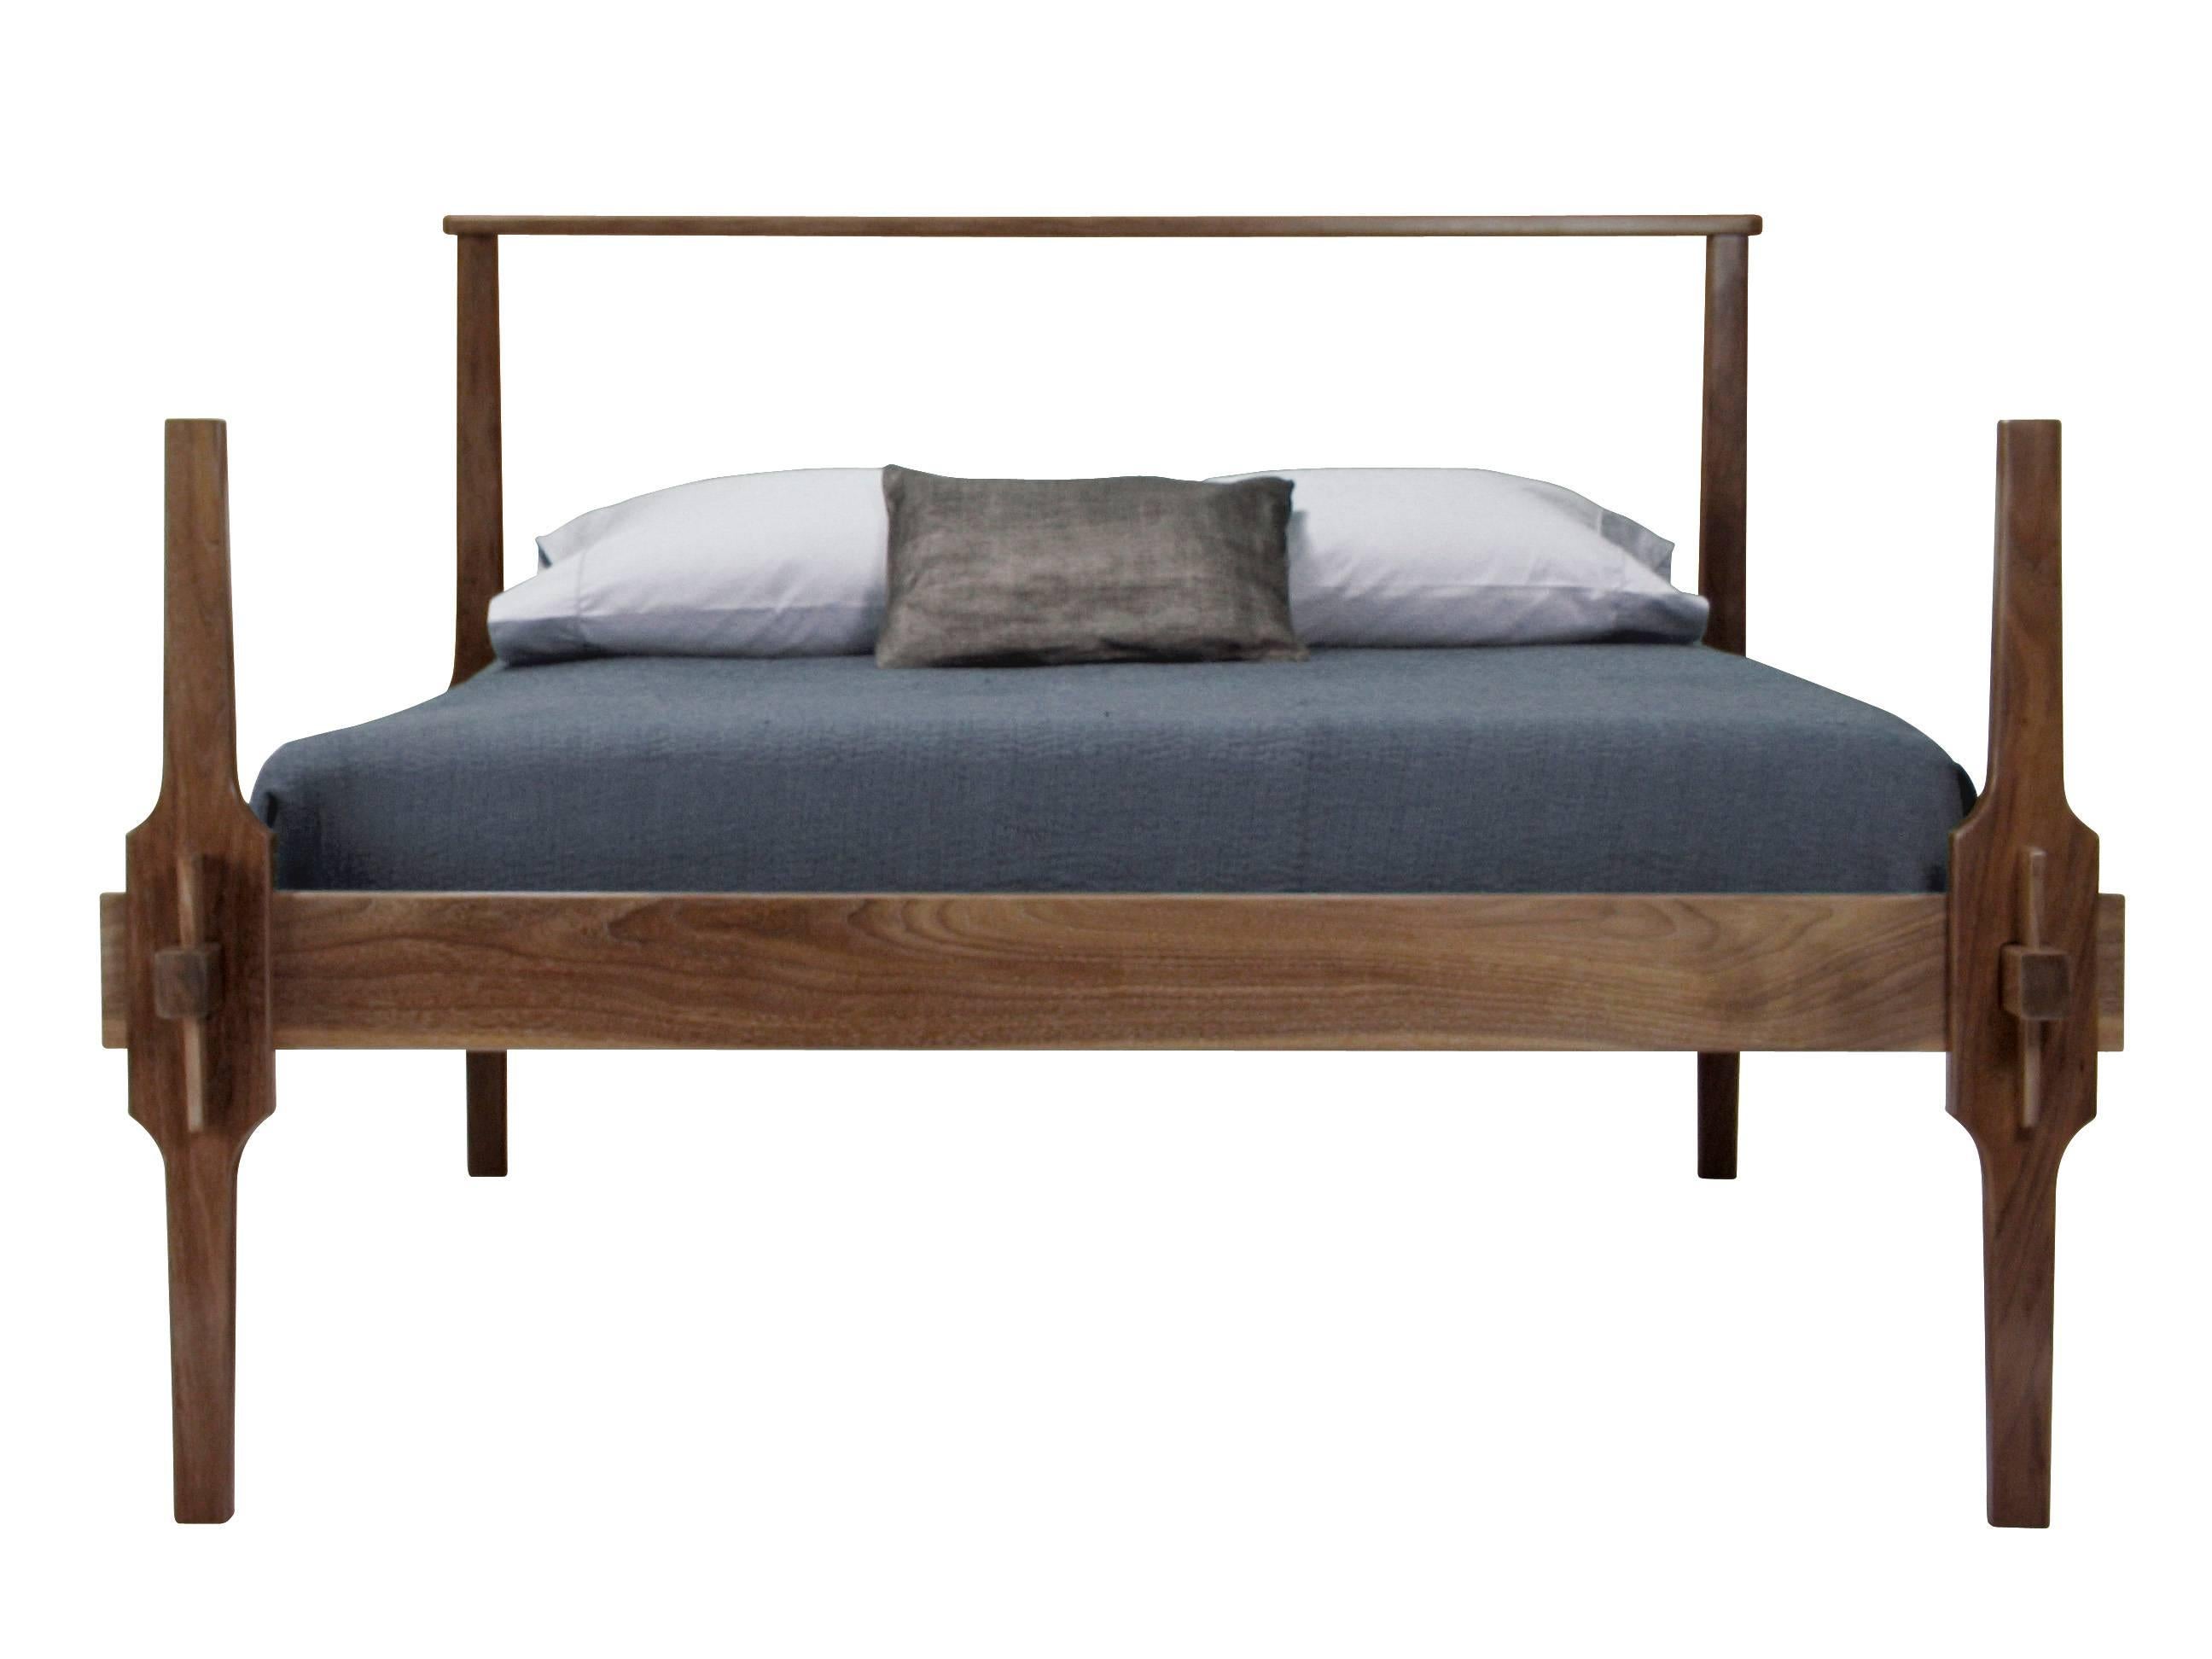 The Greydon Bed without headboard, in Marrakesh stained walnut, queen-size with 23